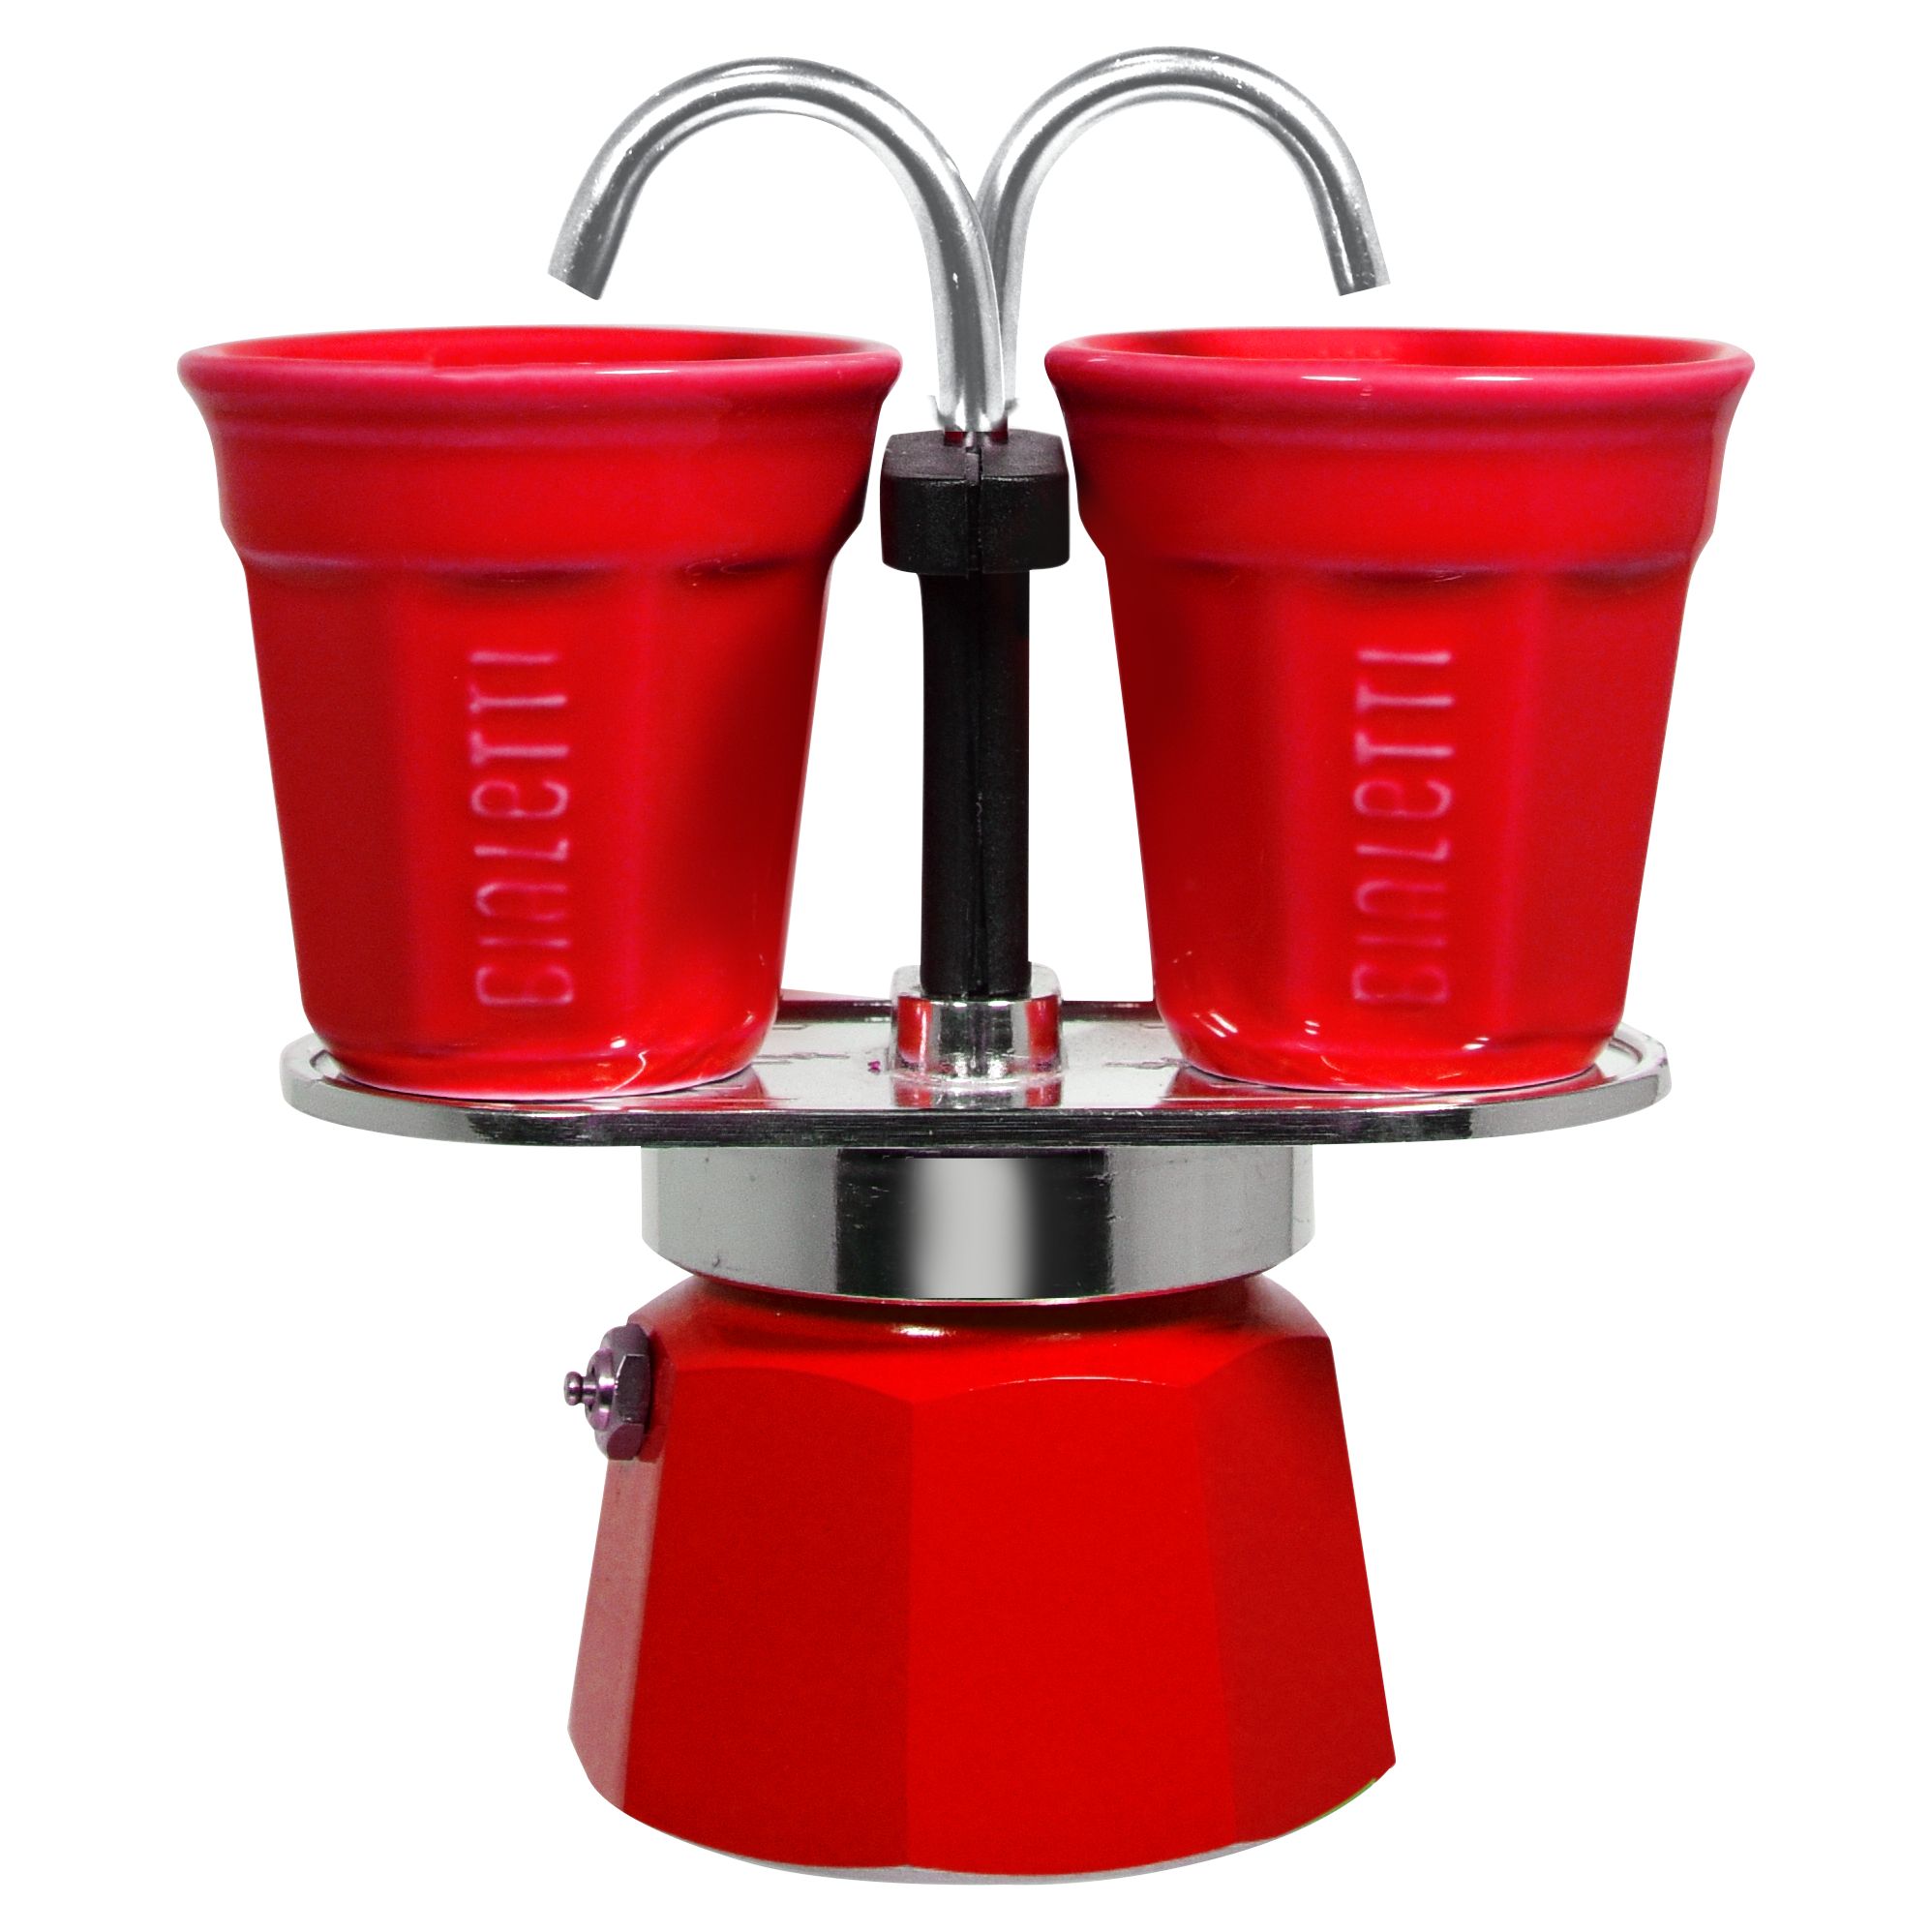 Bialetti Mini Express Coffee Pot Gift Set with 2 Cups